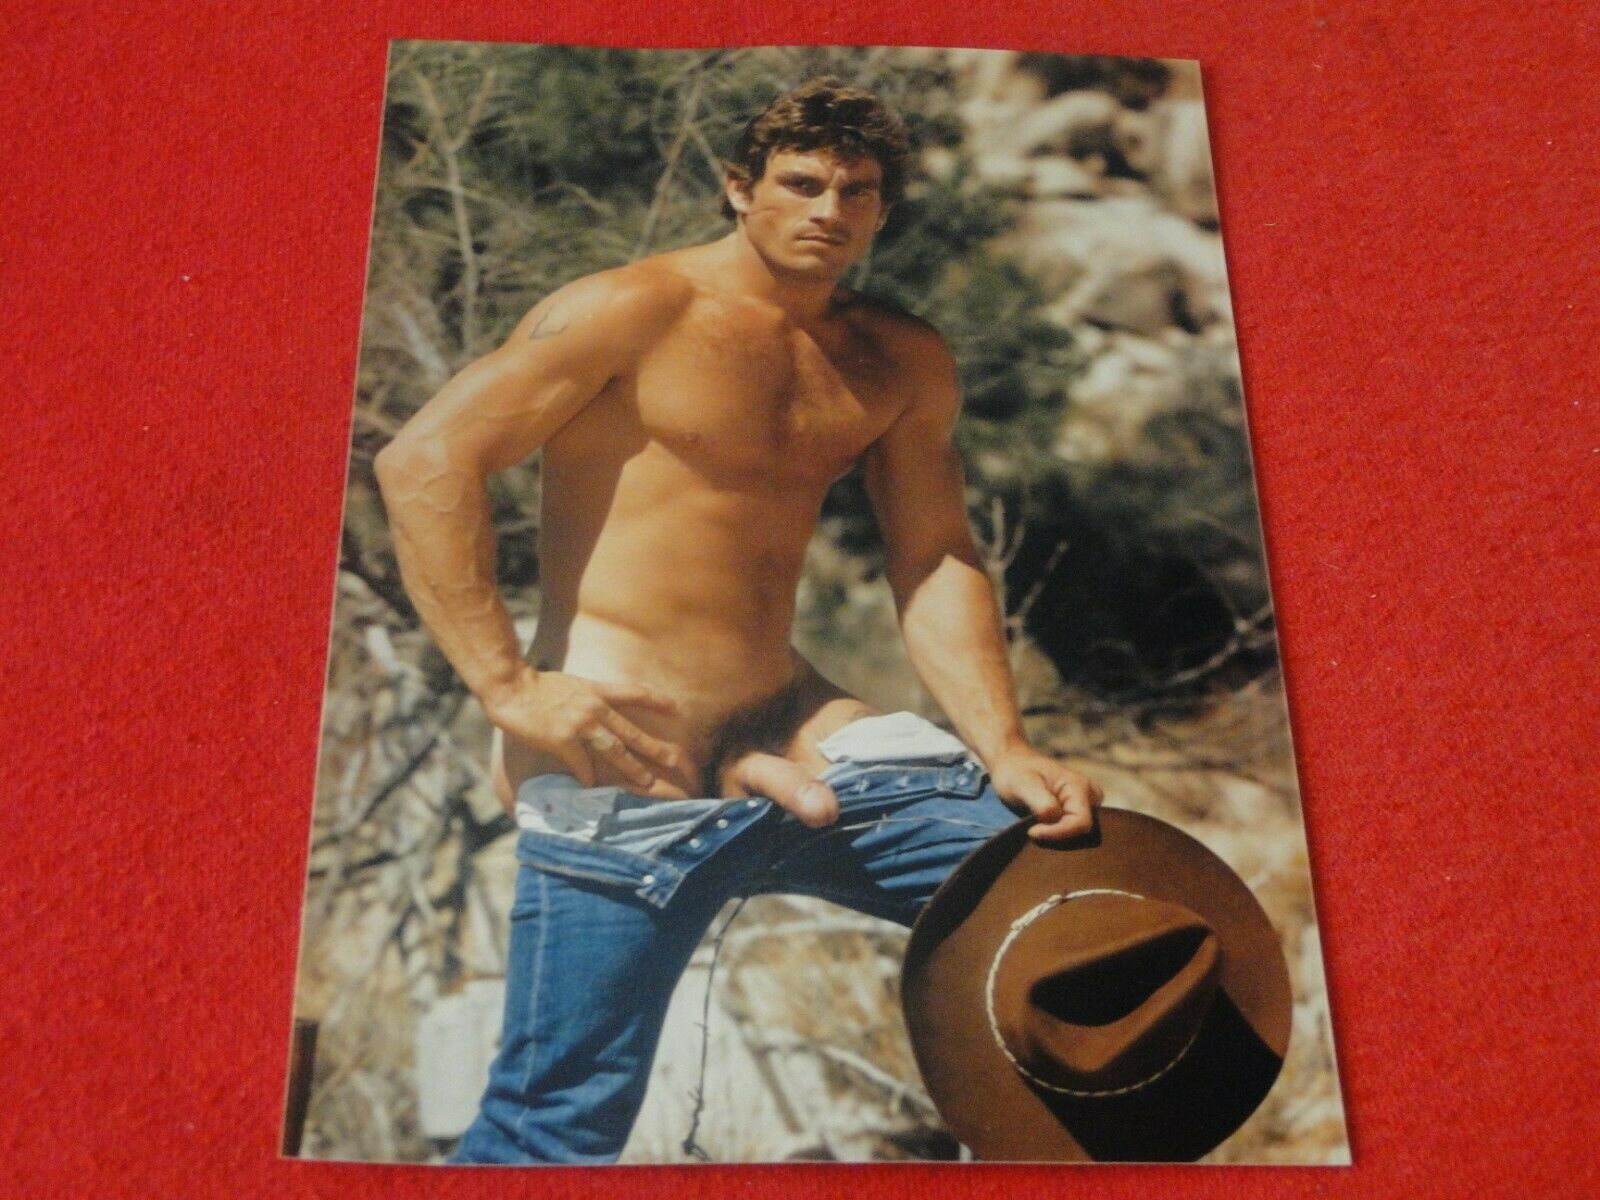 Vintage 18 Year Old + Gay Interest Nude Colt/Fox/Chippendales's Male P â€“  Ephemera Galore